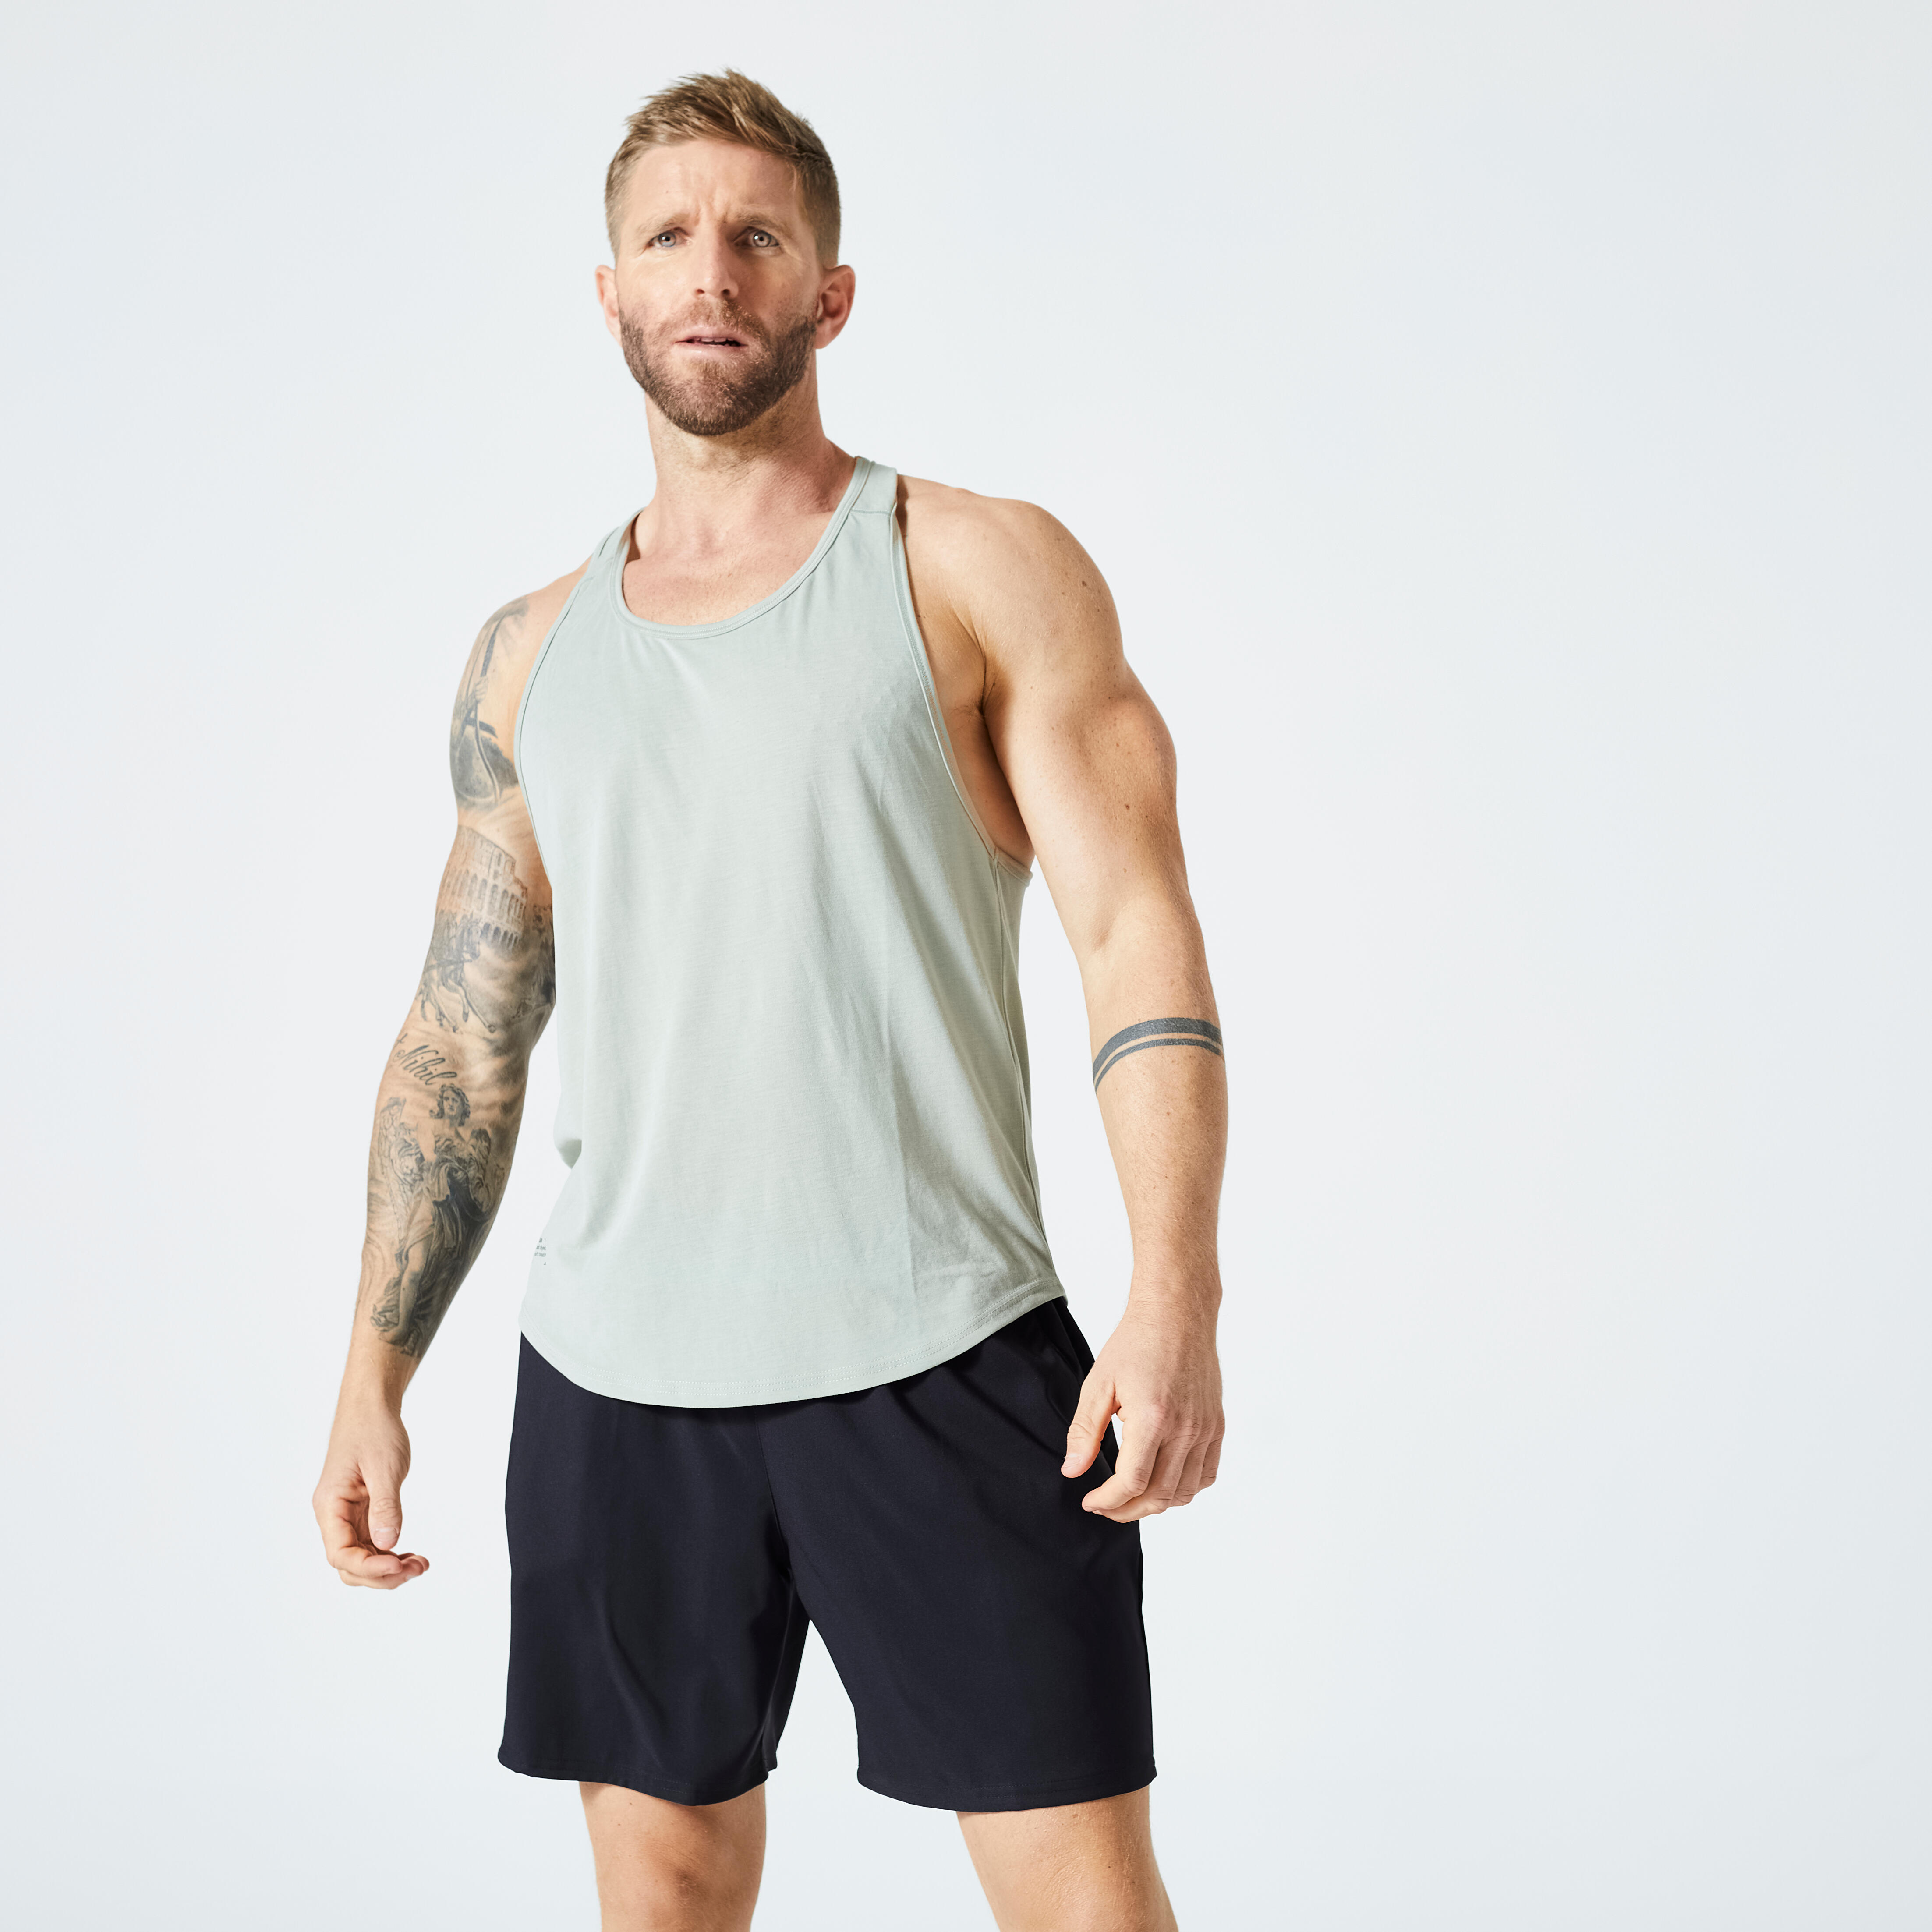 Buy HOT BUTTON Mens Gym Sleeveless Tank Tops Stringer Hoodie for